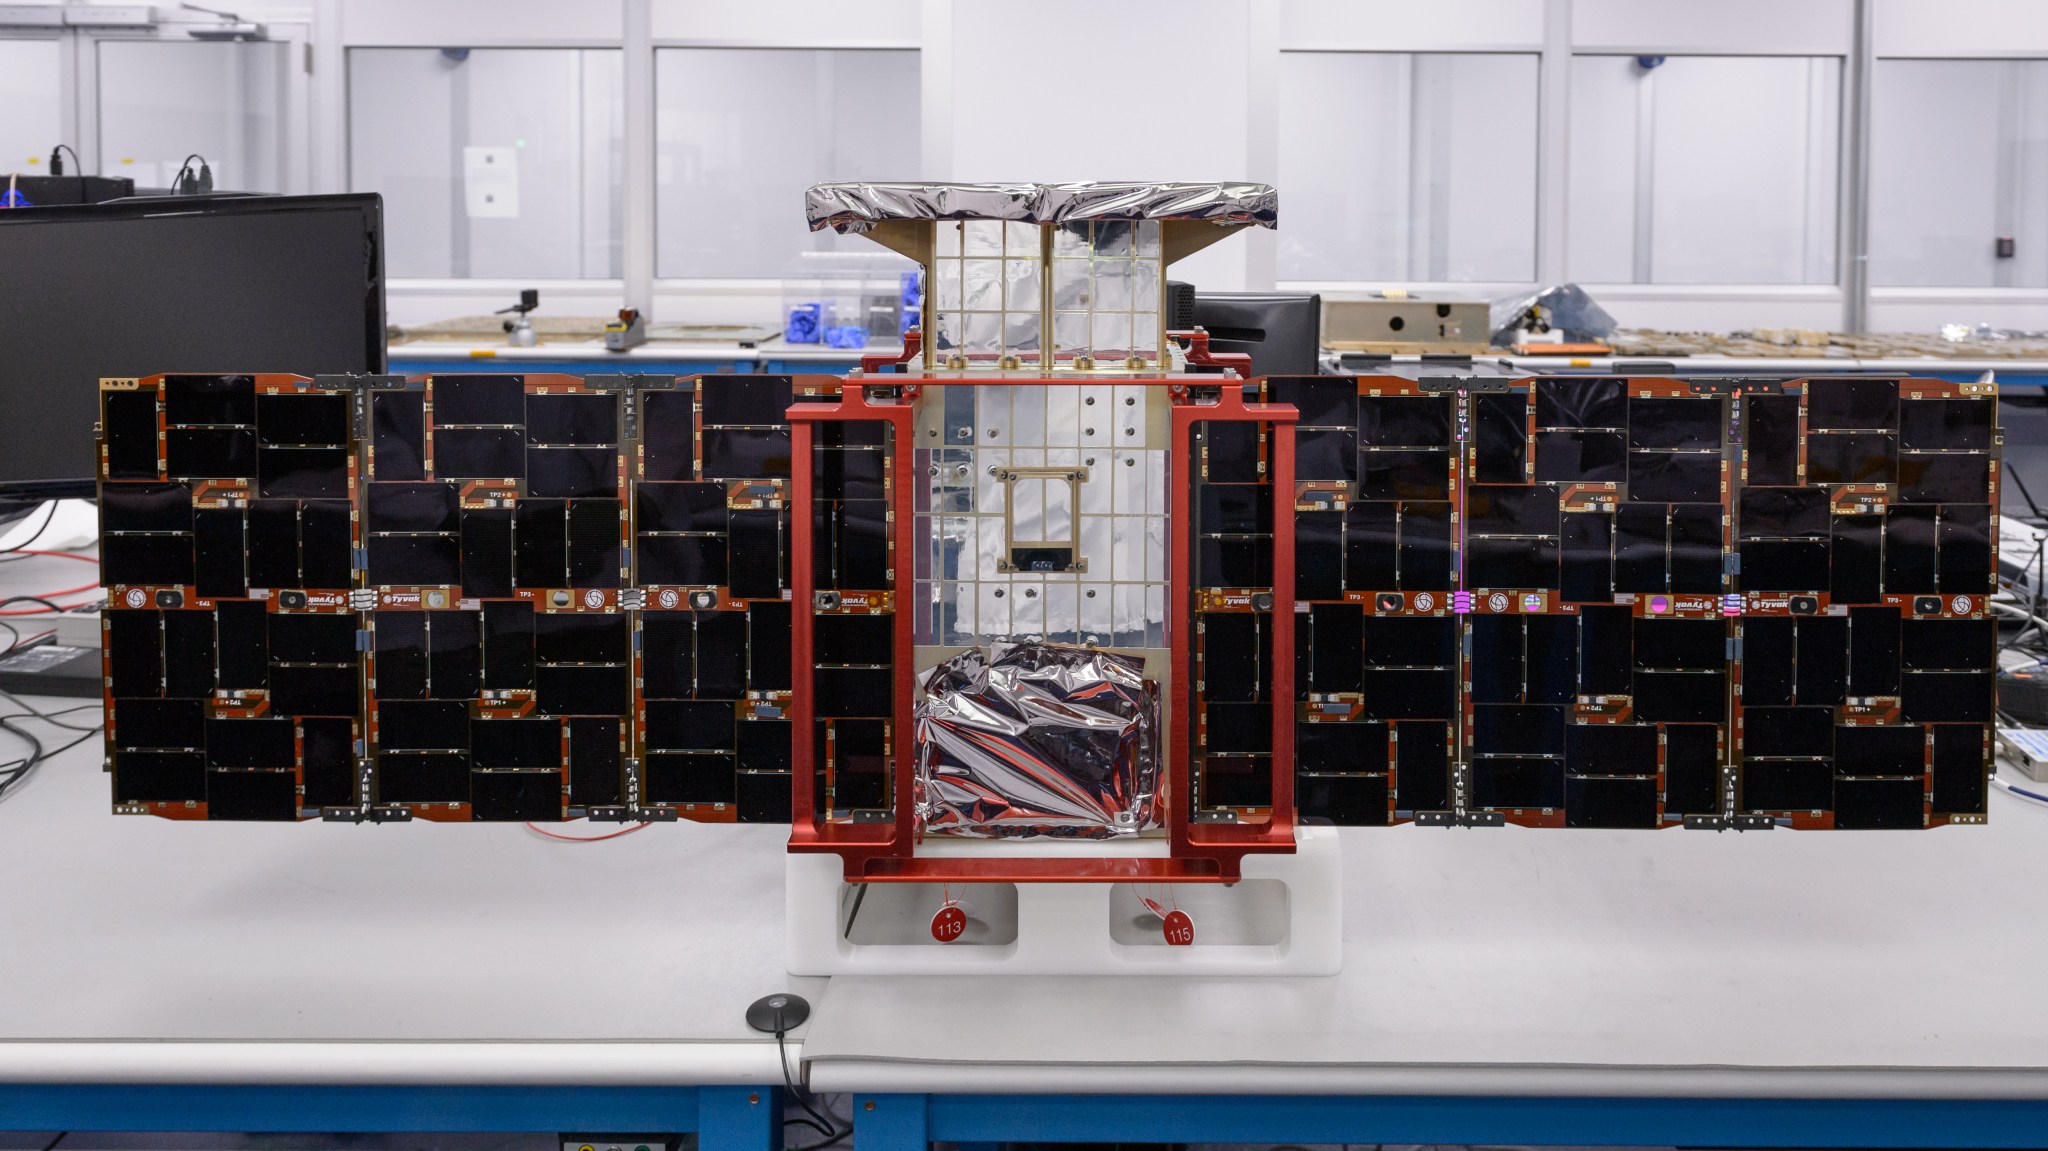 Photo of the CAPSTONE spacecraft with solar panels deployed on a workbench at Tyvak Nano-Satellite Systems, Inc., in Irvine, California.